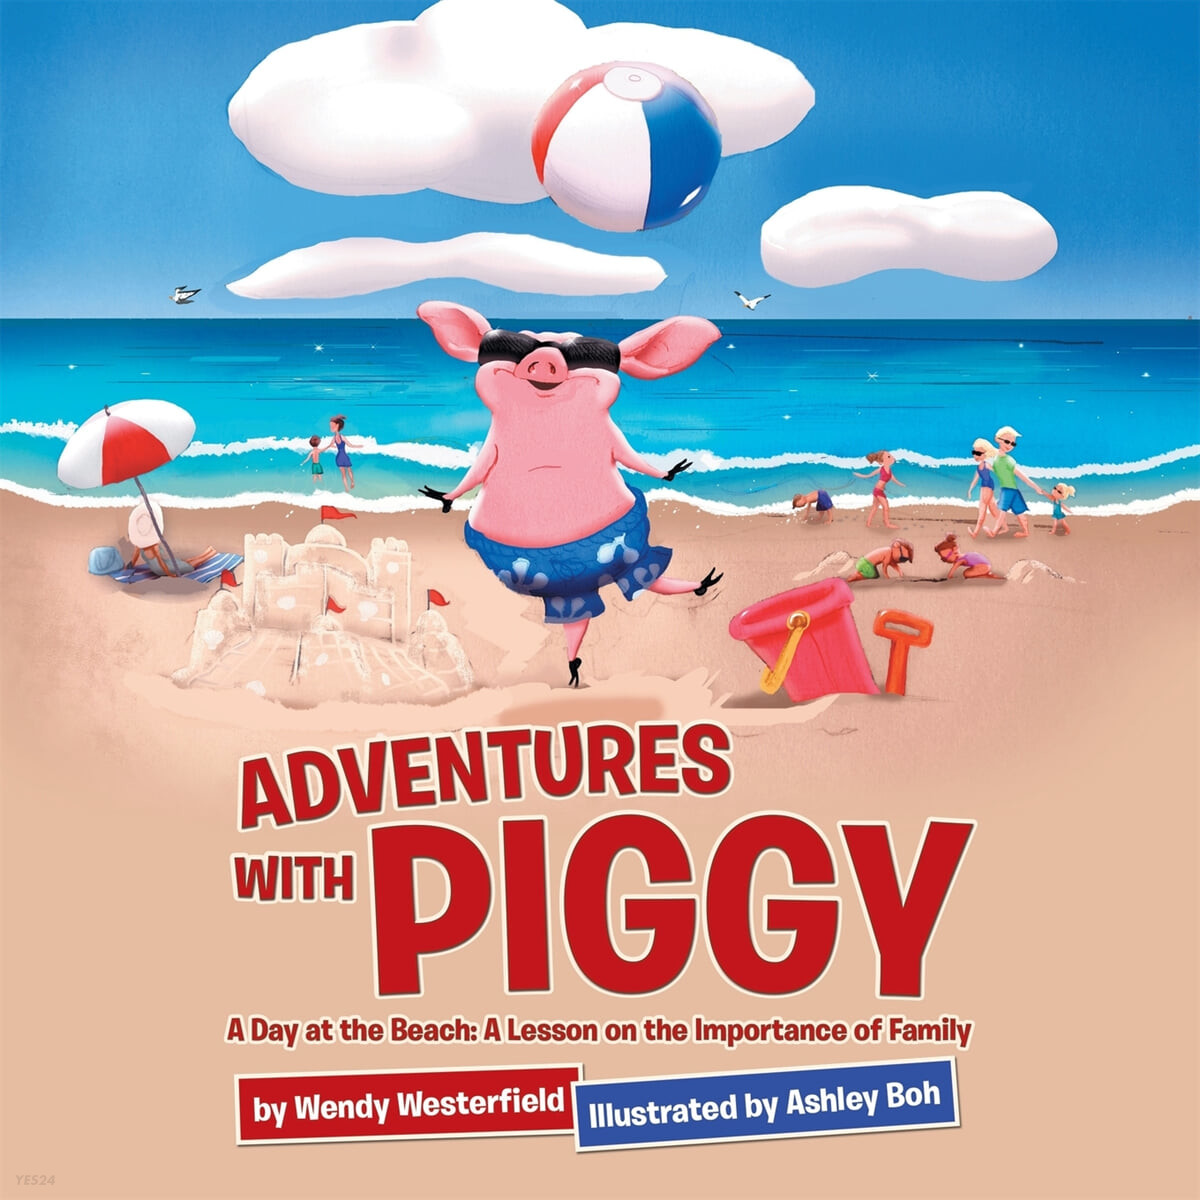 Adventures with Piggy (A Day at the Beach: A Lesson on the Importance of Family)